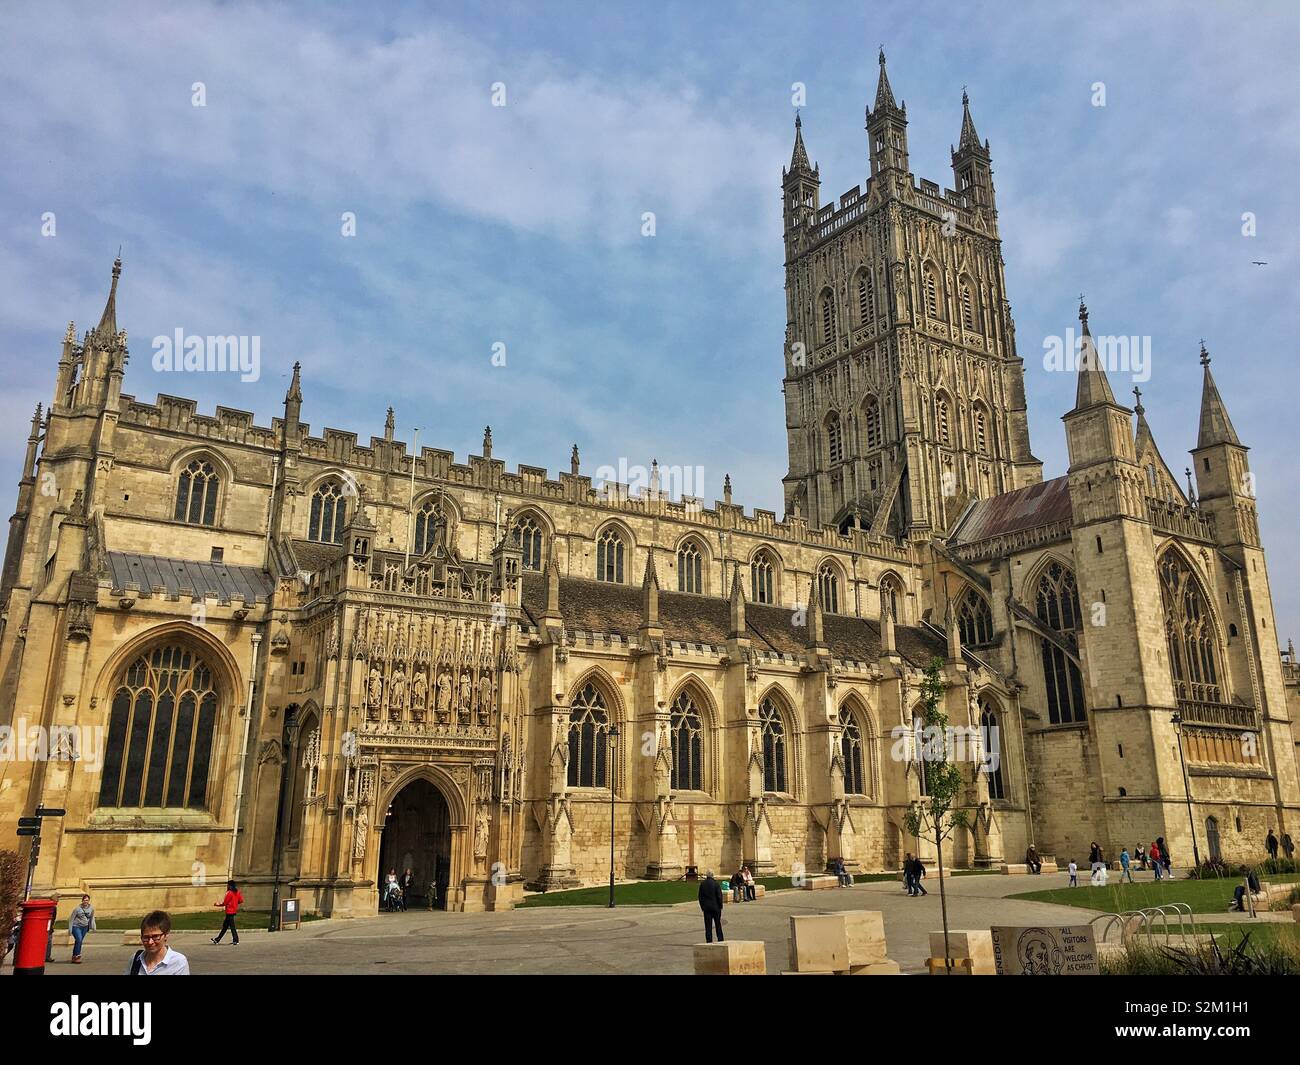 Spectacular Gloucester cathedral Stock Photo